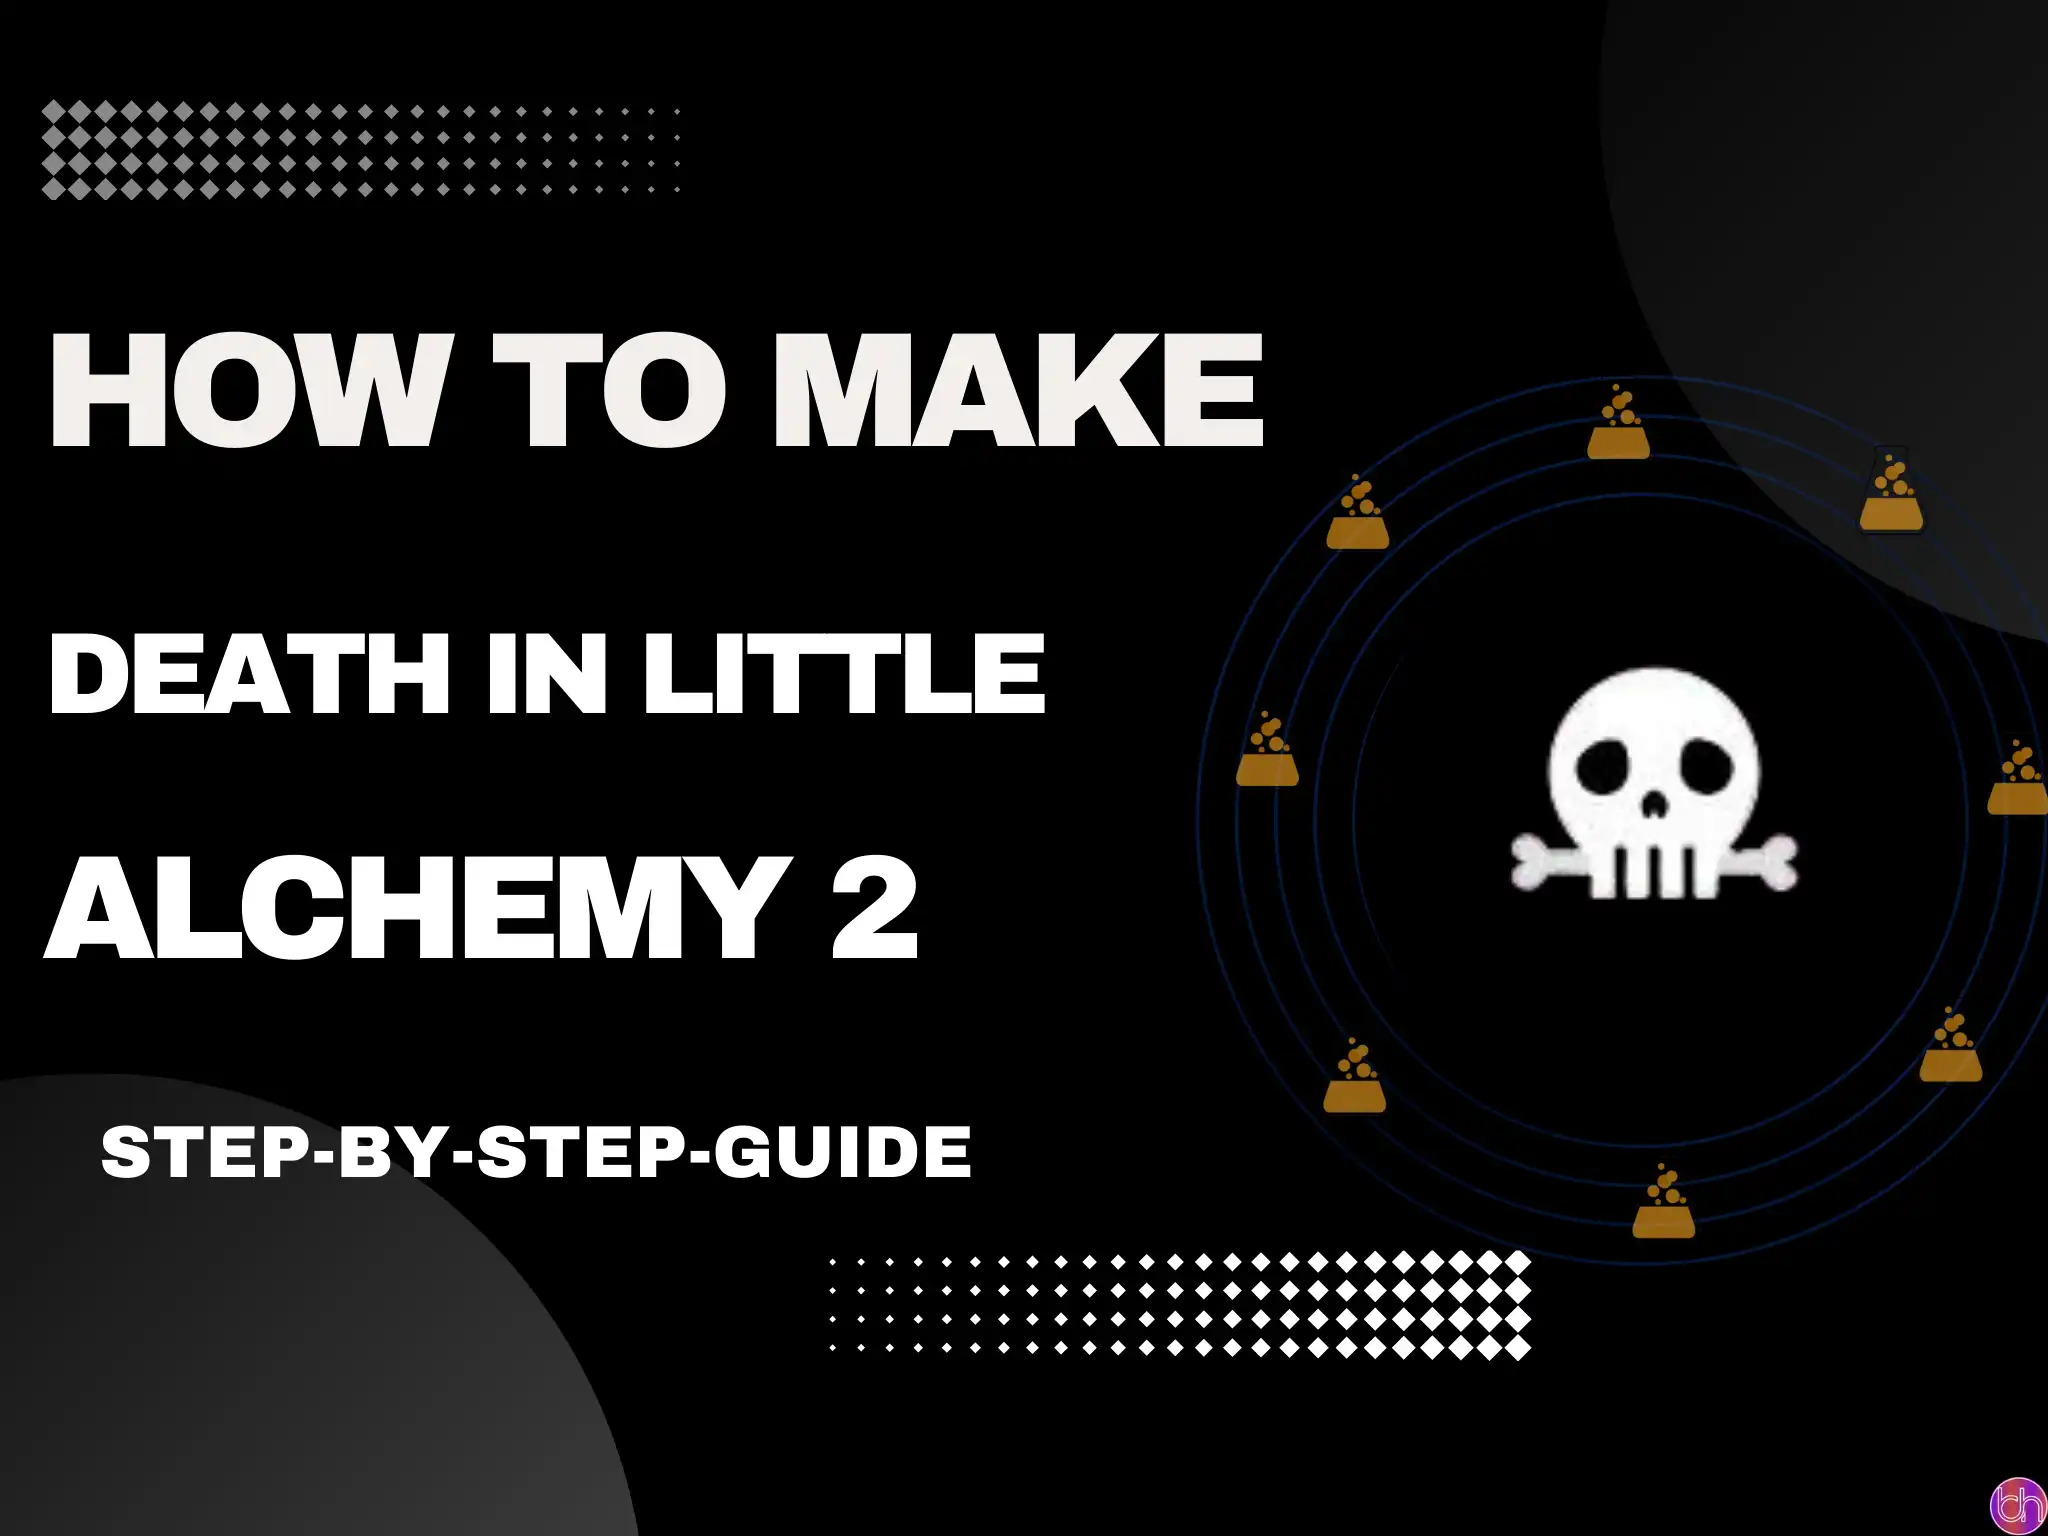 How to make Death in Little Alchemy 2